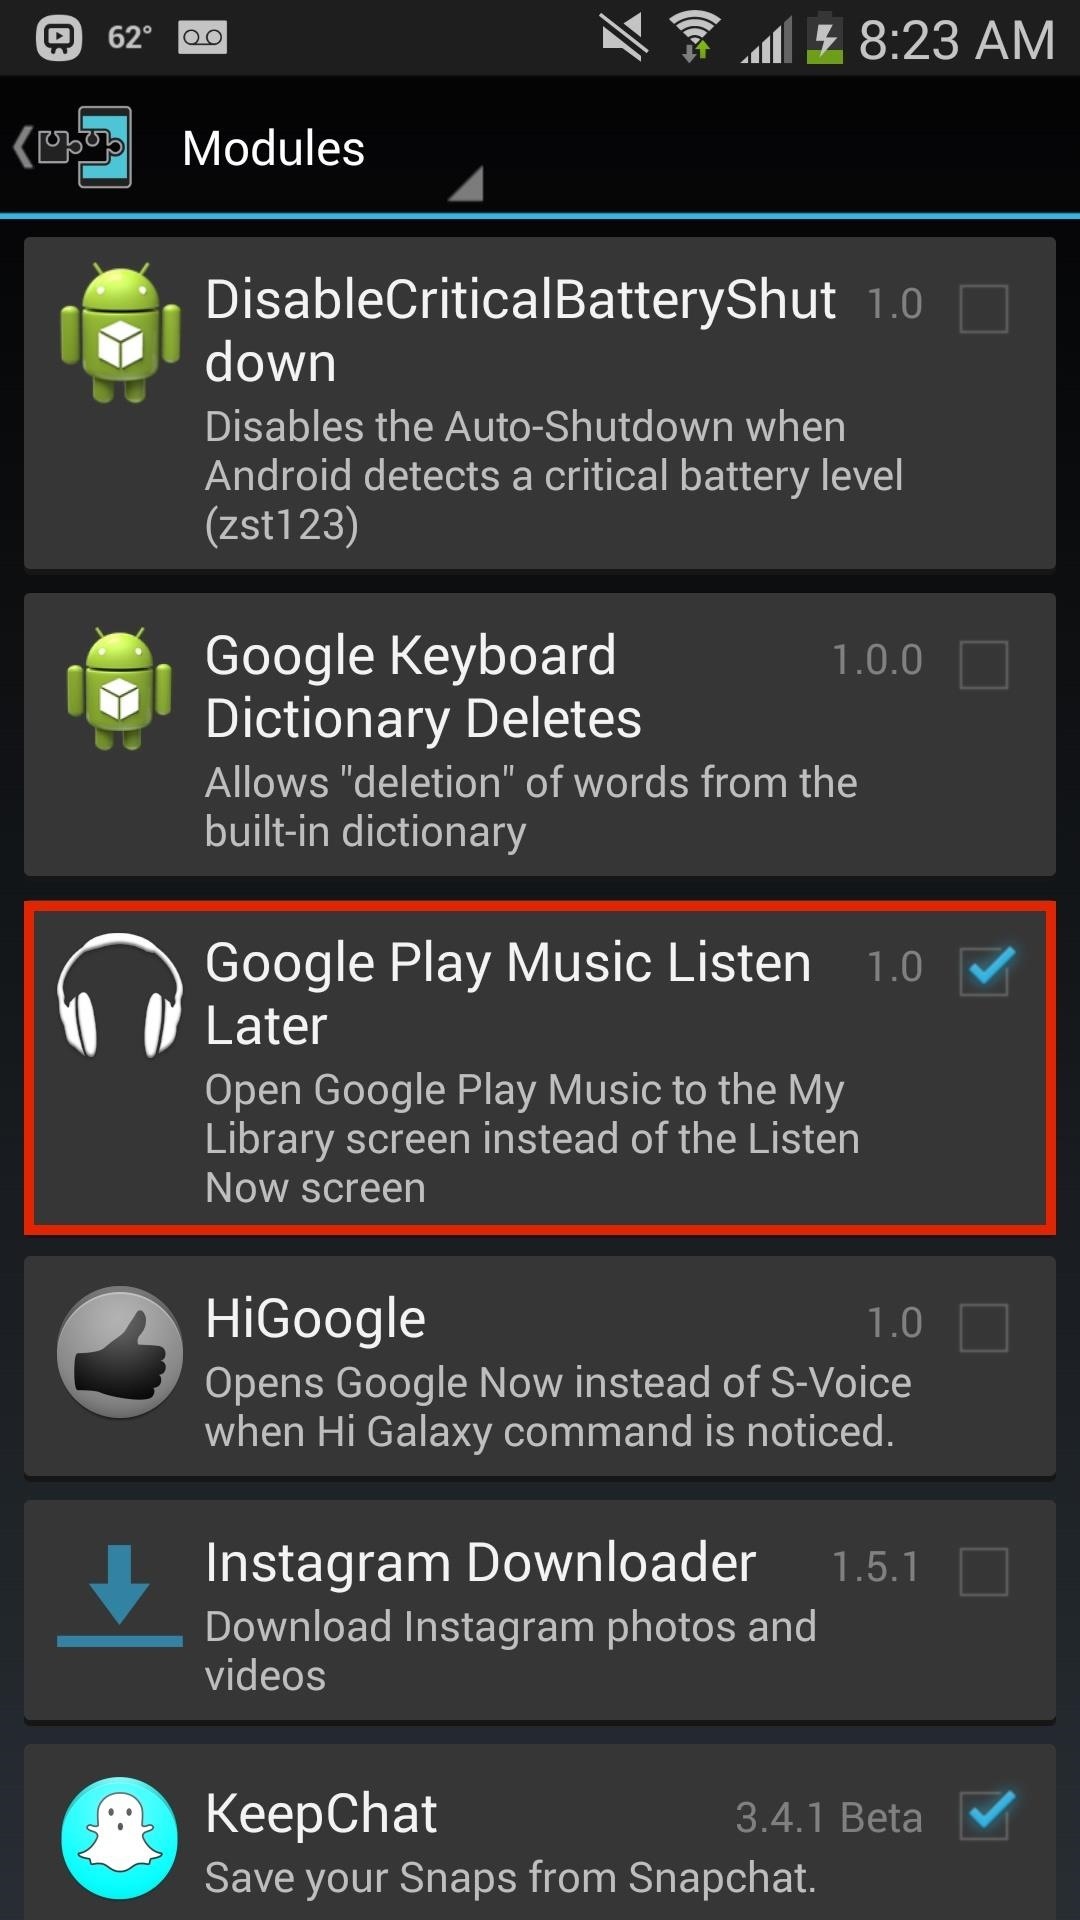 How to Customize the Default Landing Screen & Tab for Google Play Music on Your Galaxy Note 3